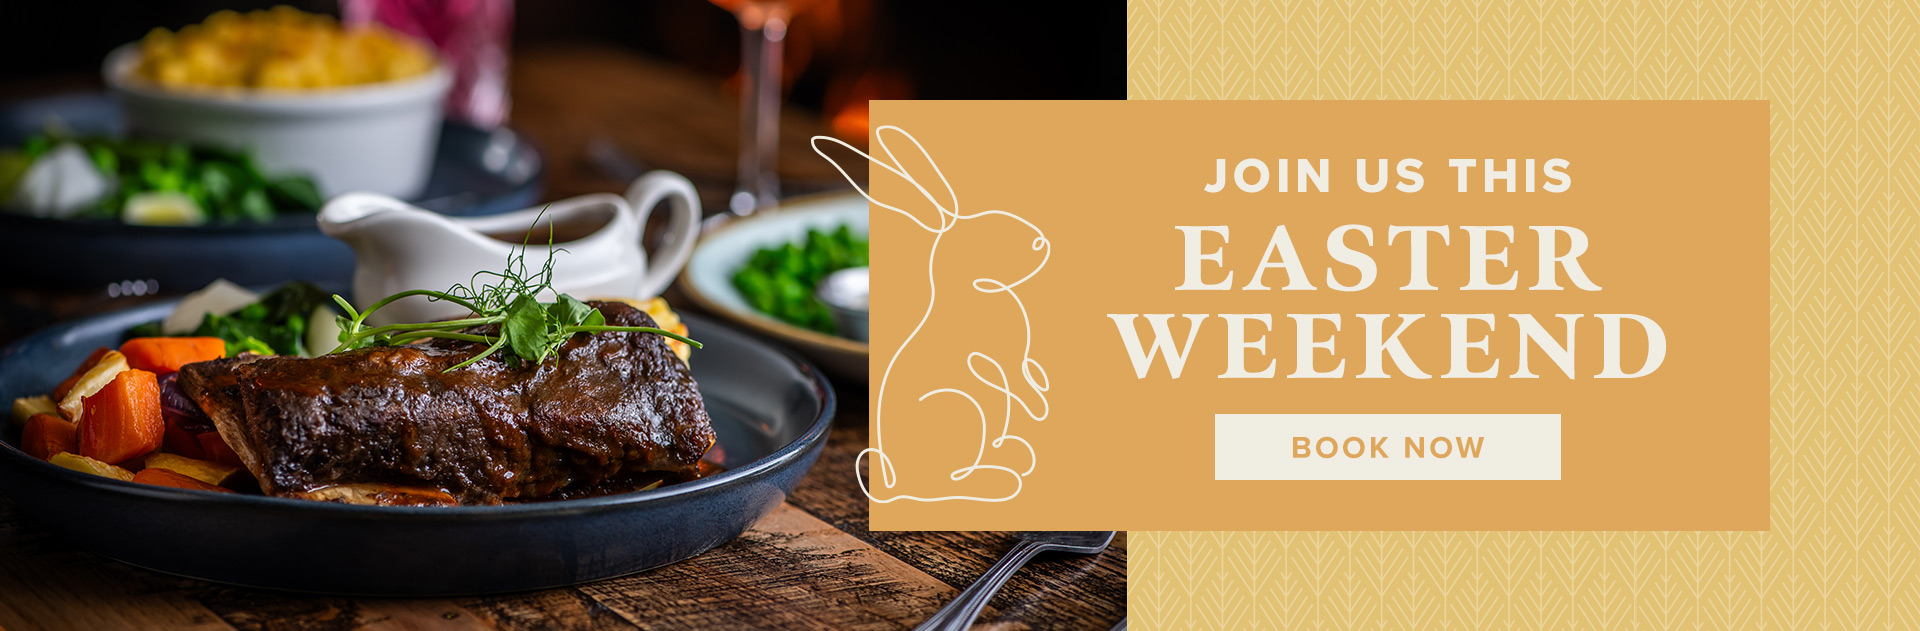 Easter at The Earl Haig in Bexleyheath